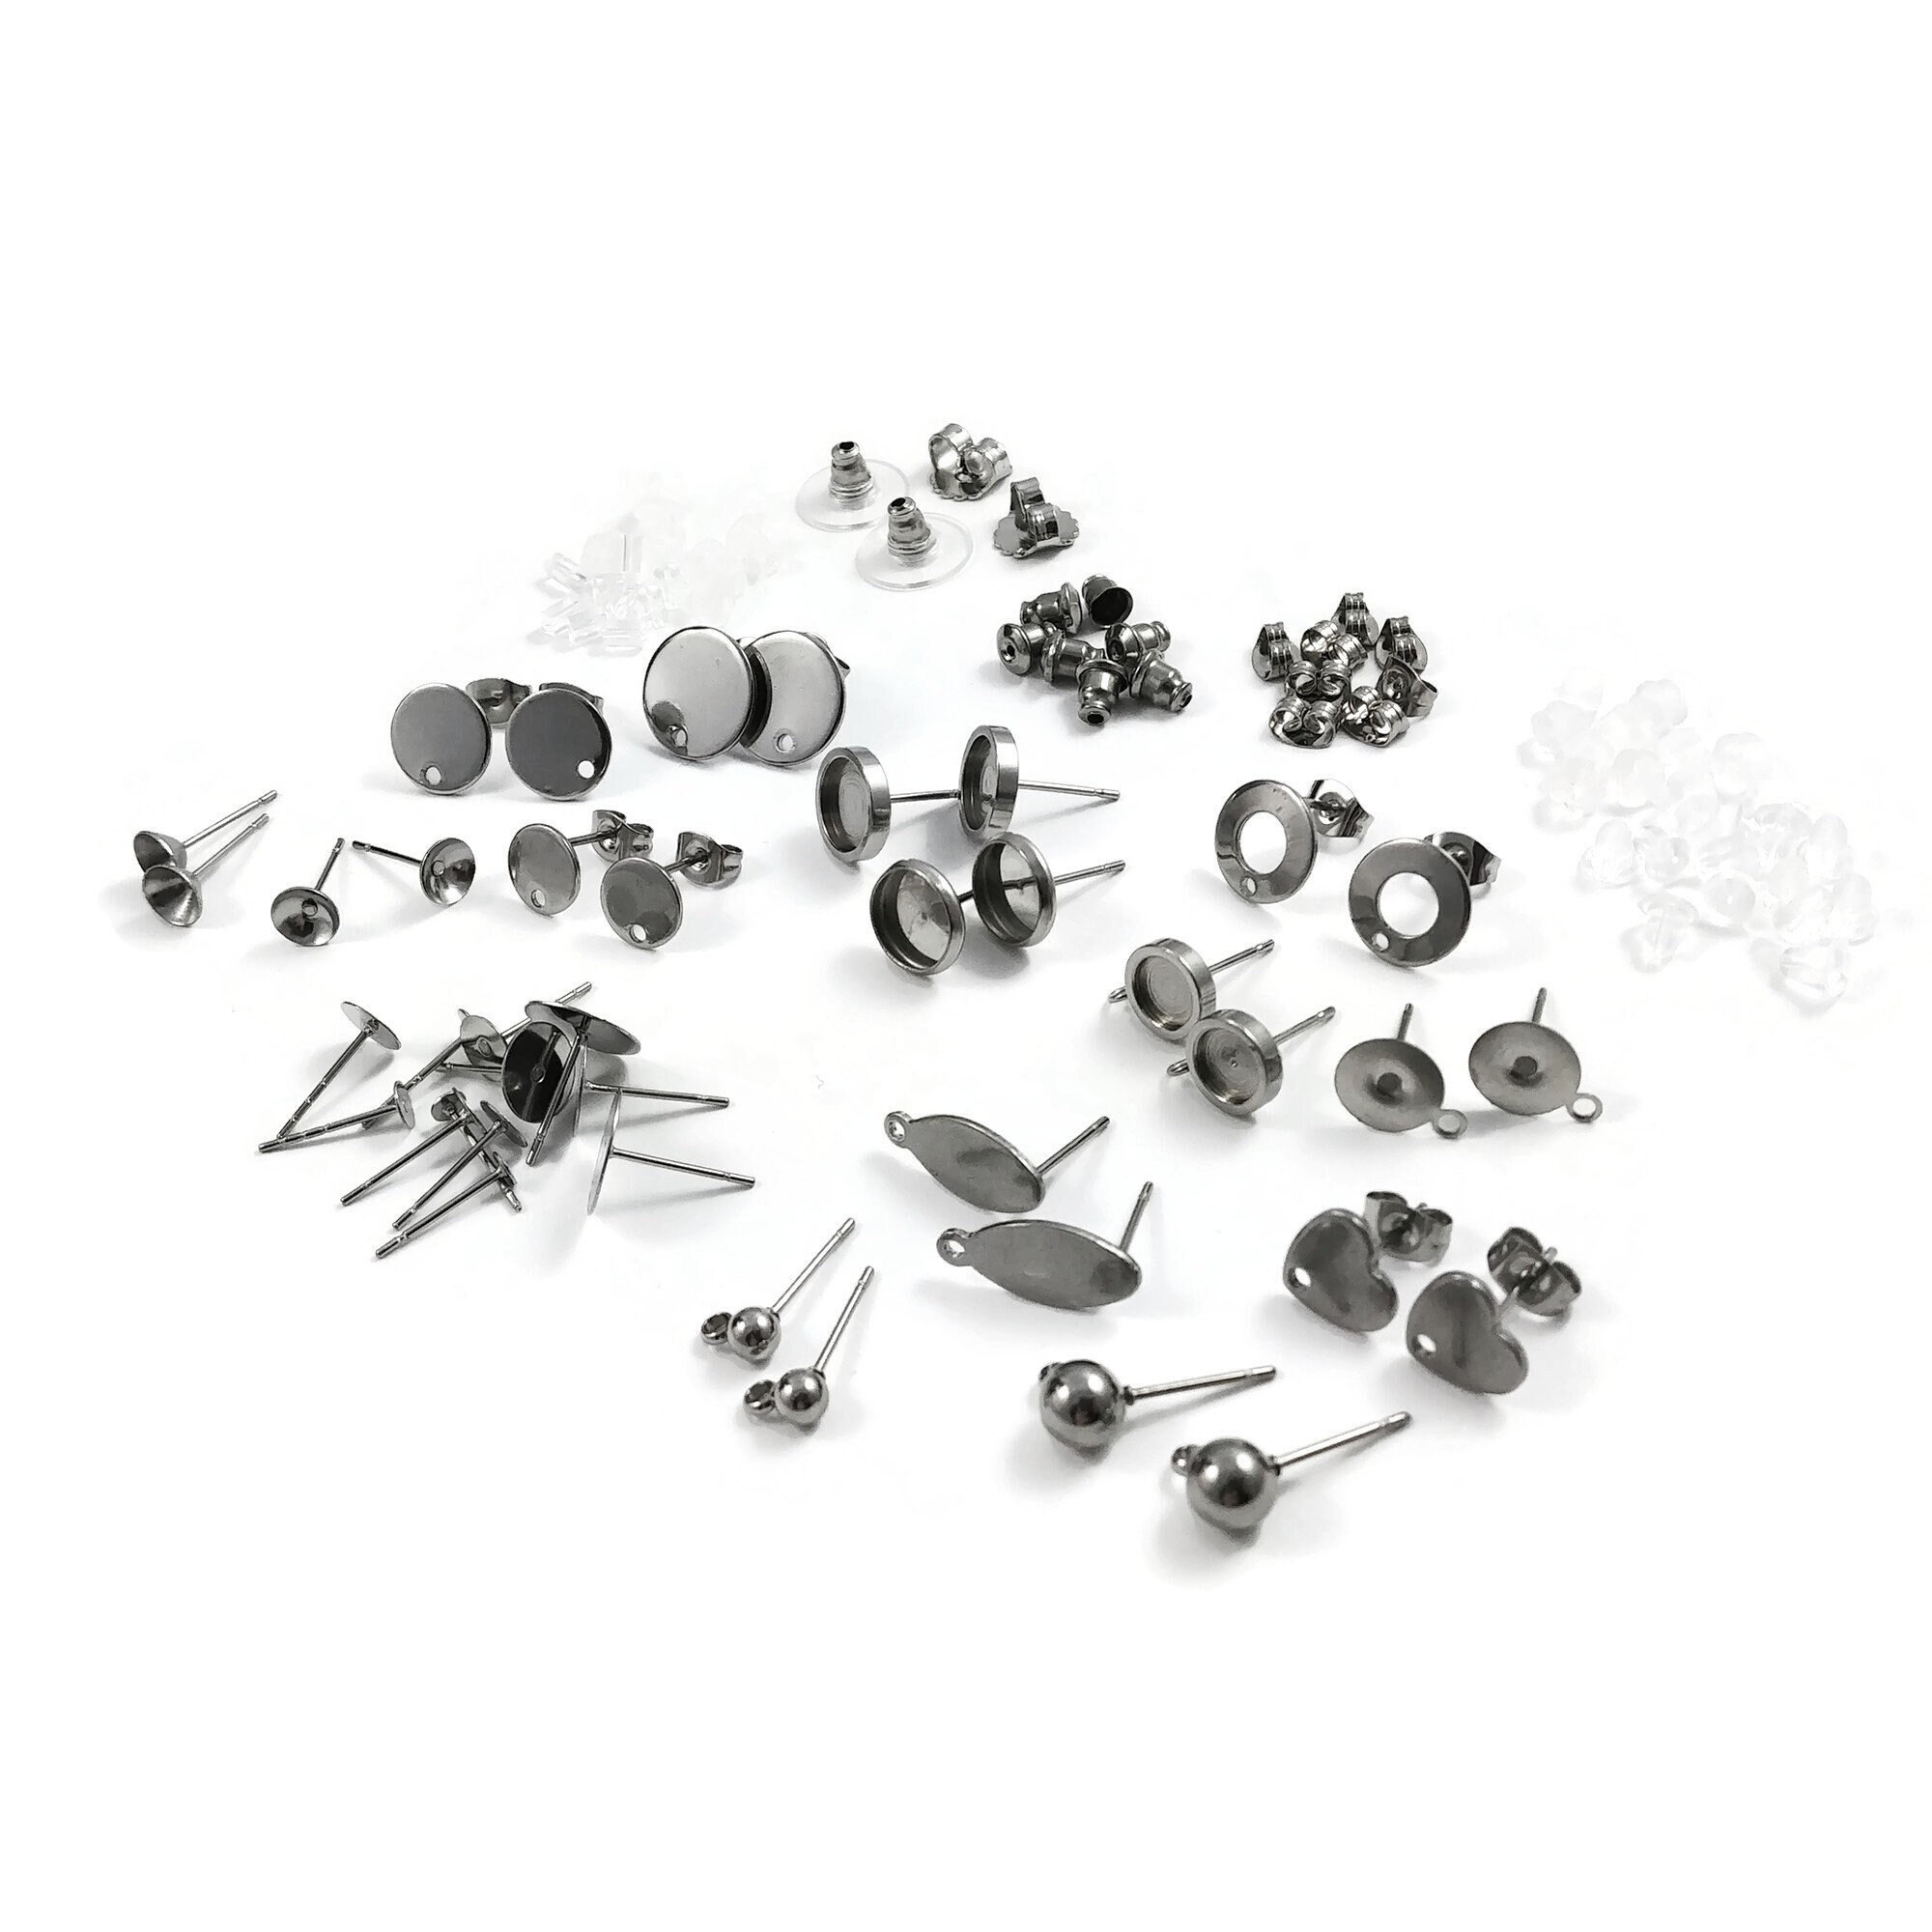 Earring Making Kit Makes 12 Pair-includes Earring Posts and Backs & REGULAR  Glass Domes 